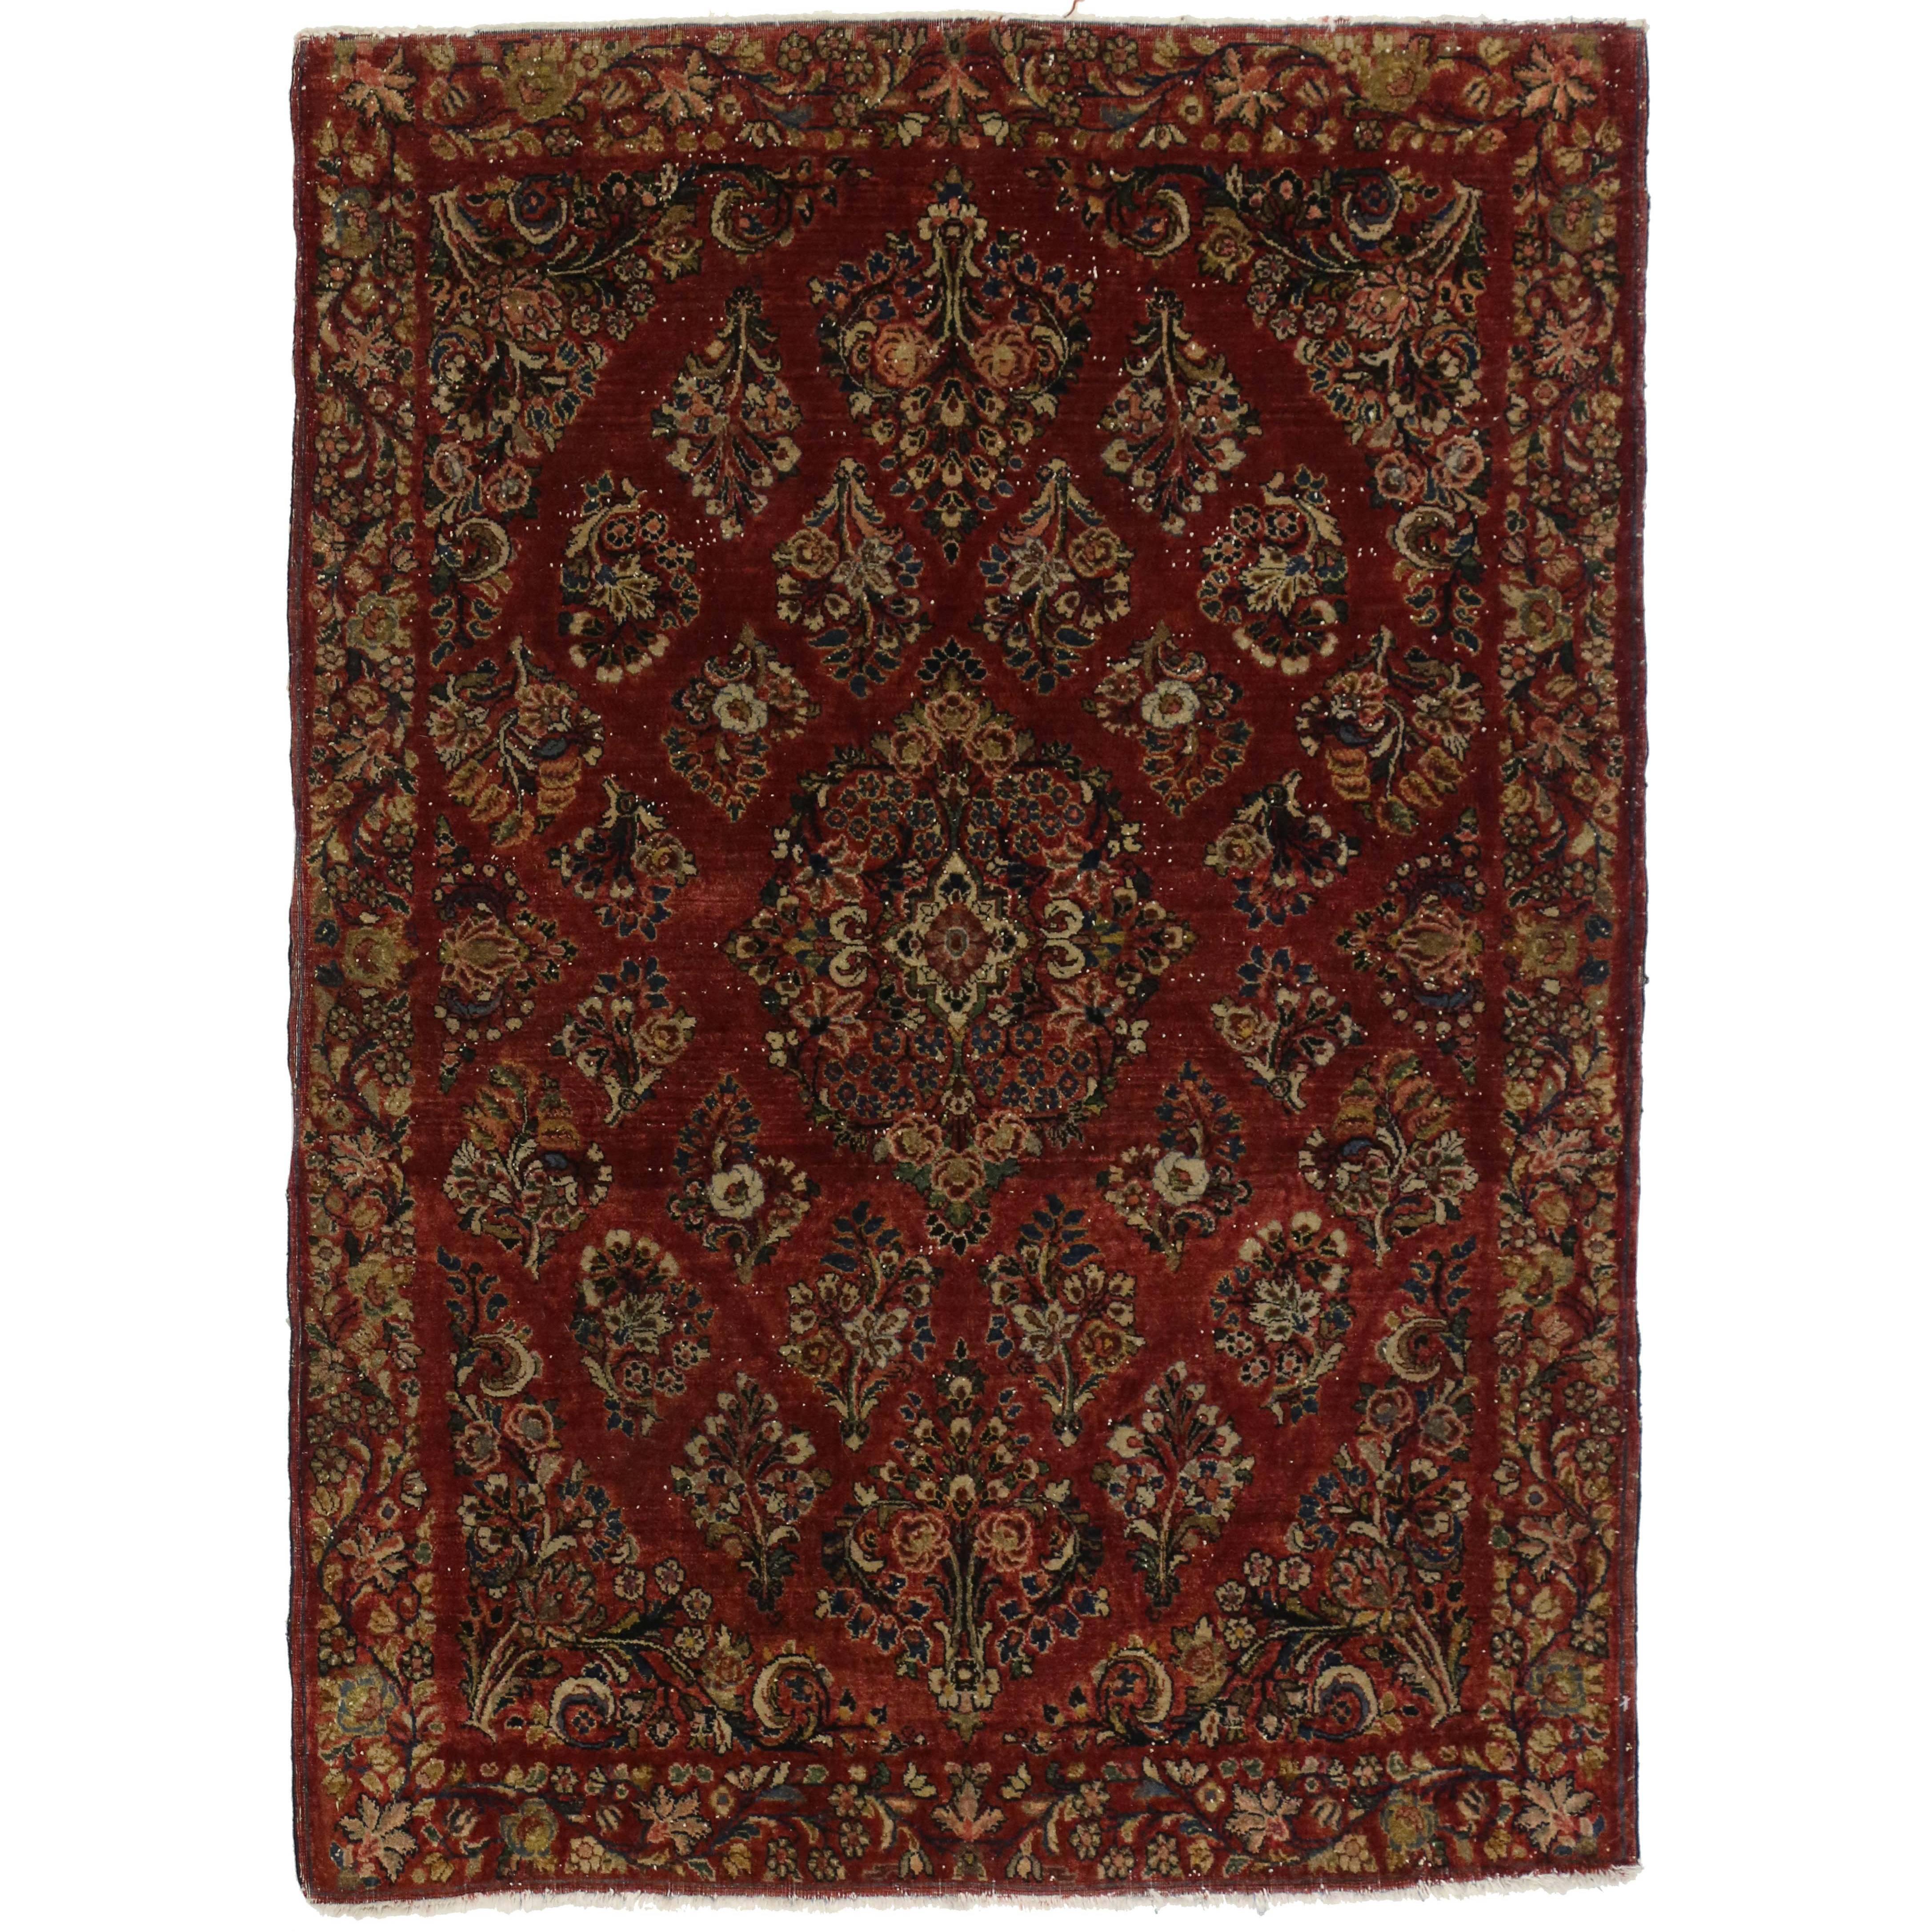 Antique Sarouk Persian Rug with Old World Victorian Style